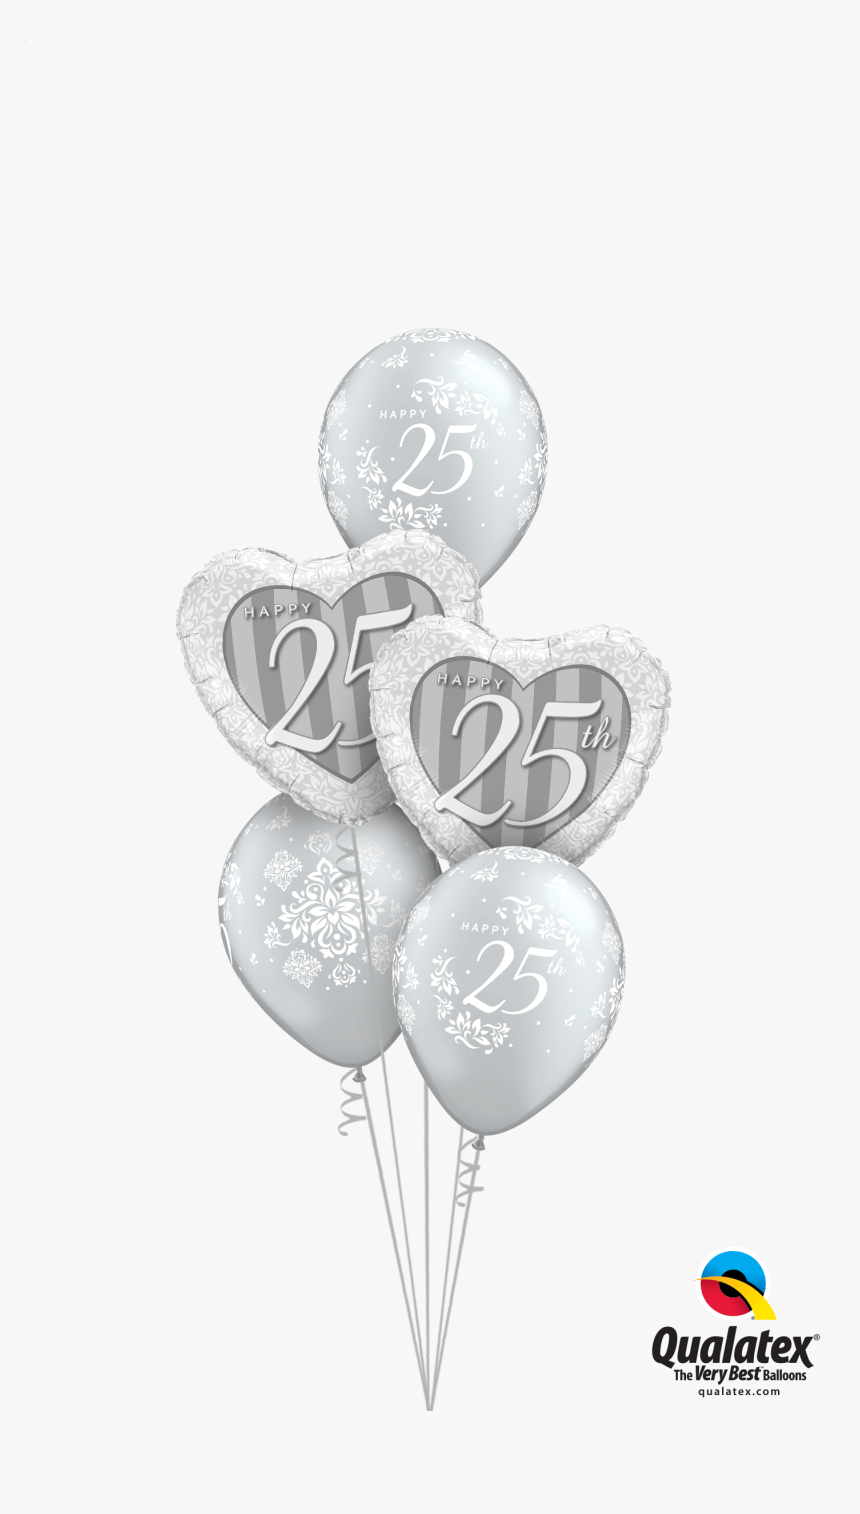 25th Anniversary Classic At London Helium Balloons - Happy Birthday Red And Blue Balloons, HD Png Download, Free Download